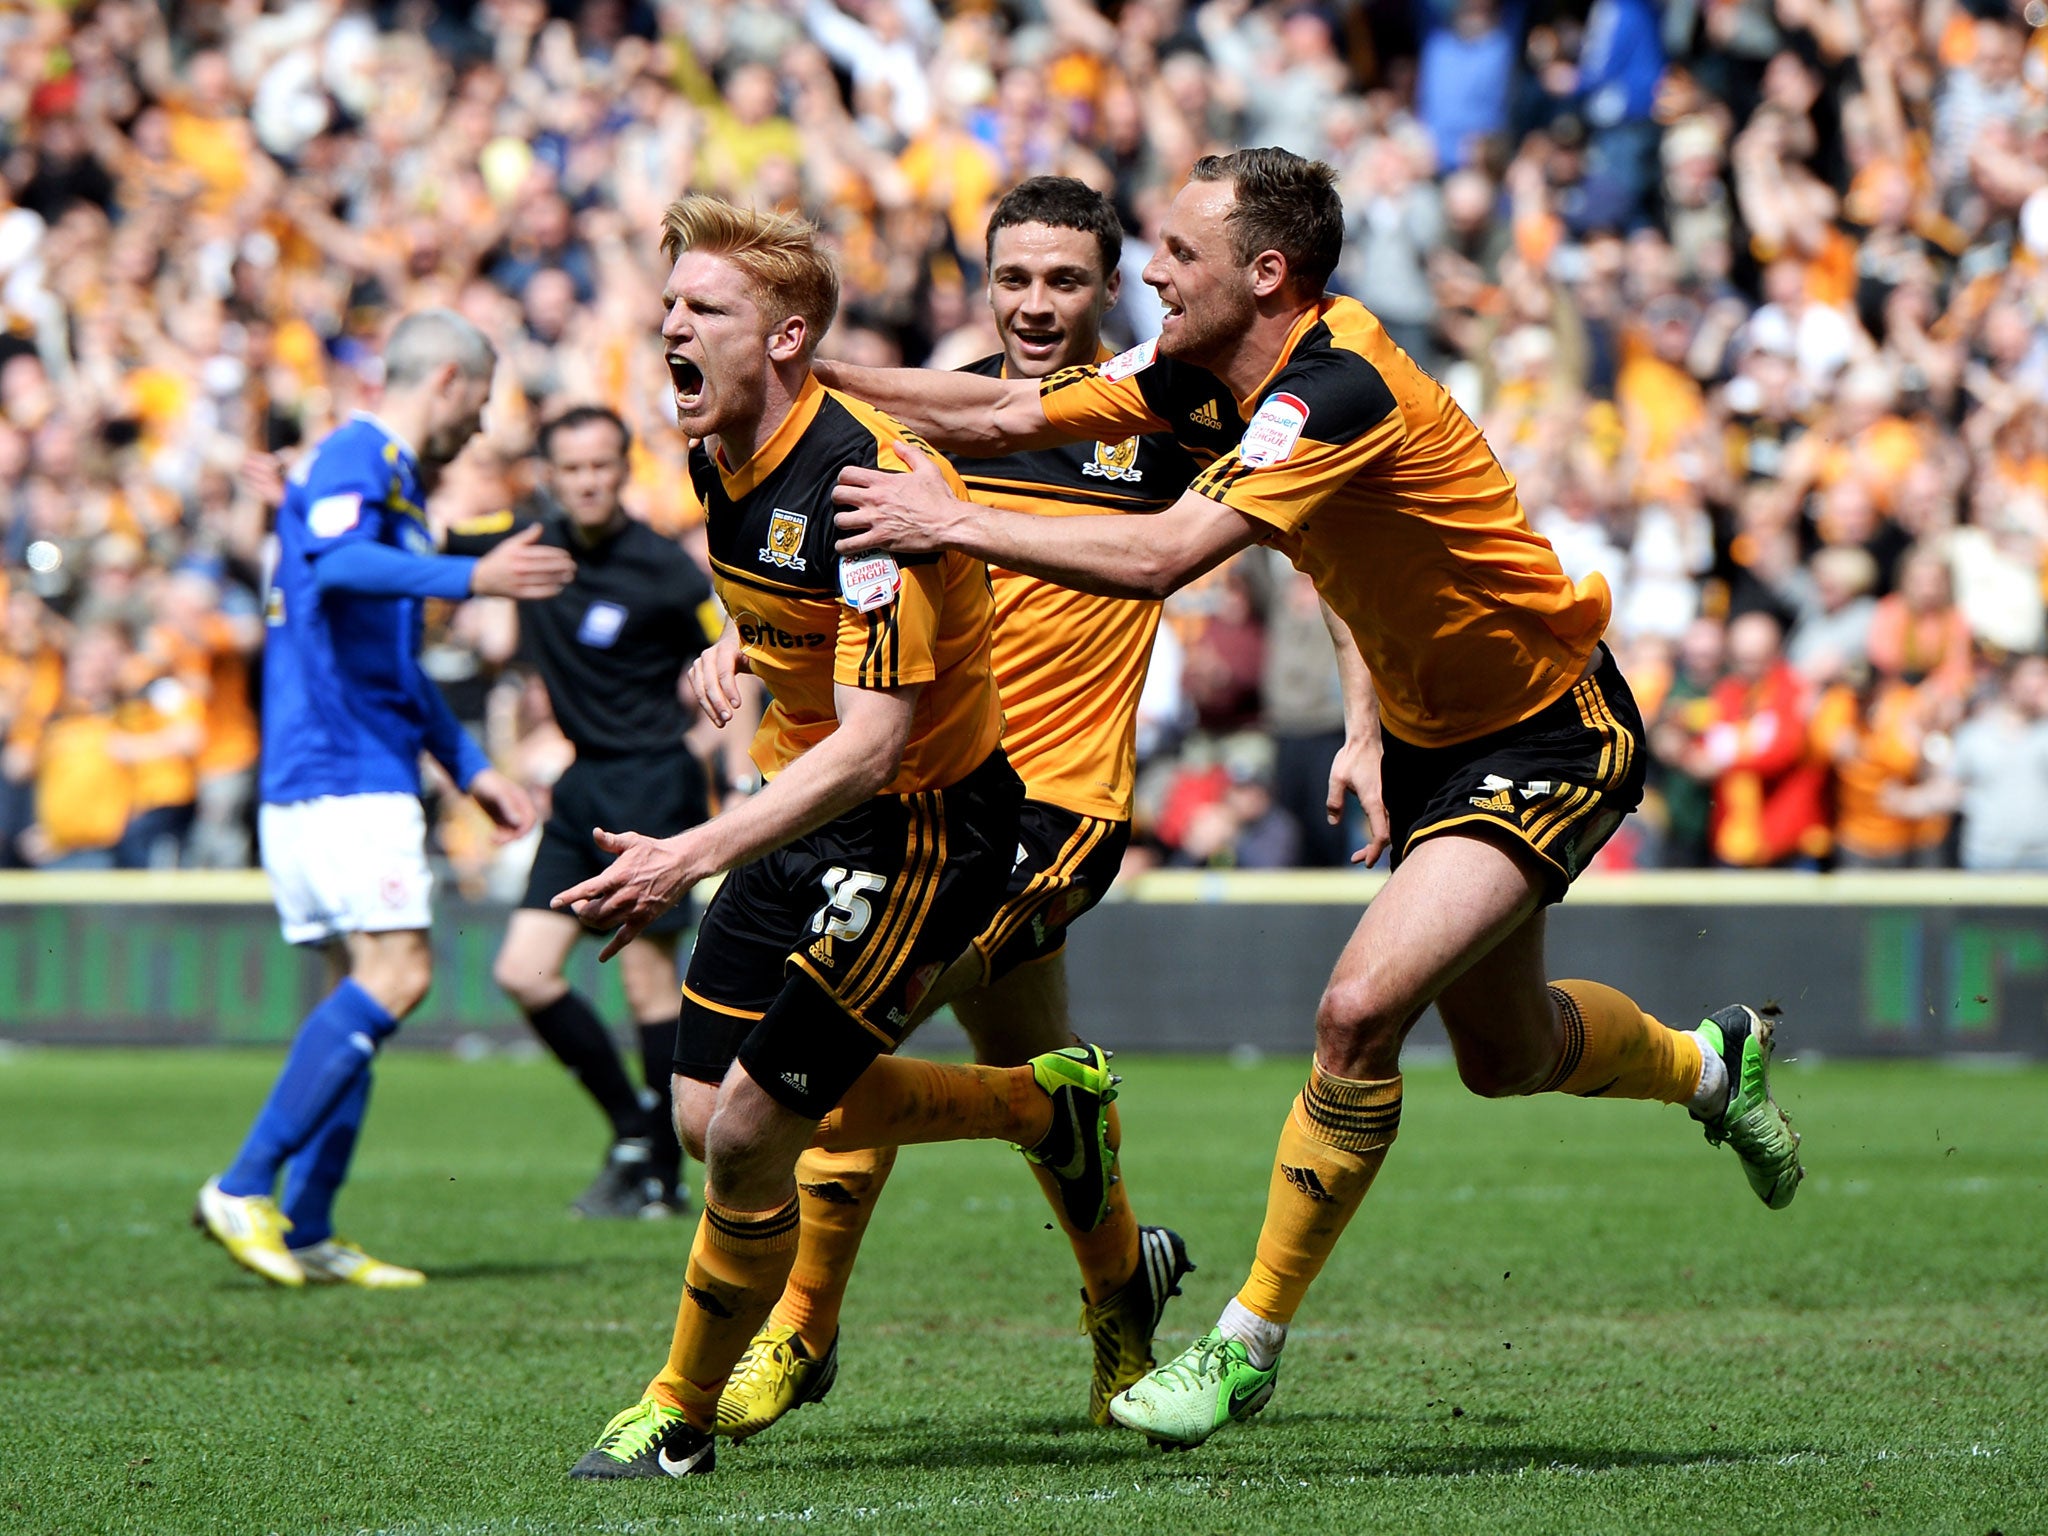 Hull eased through to the Premier League despite a dramatic end